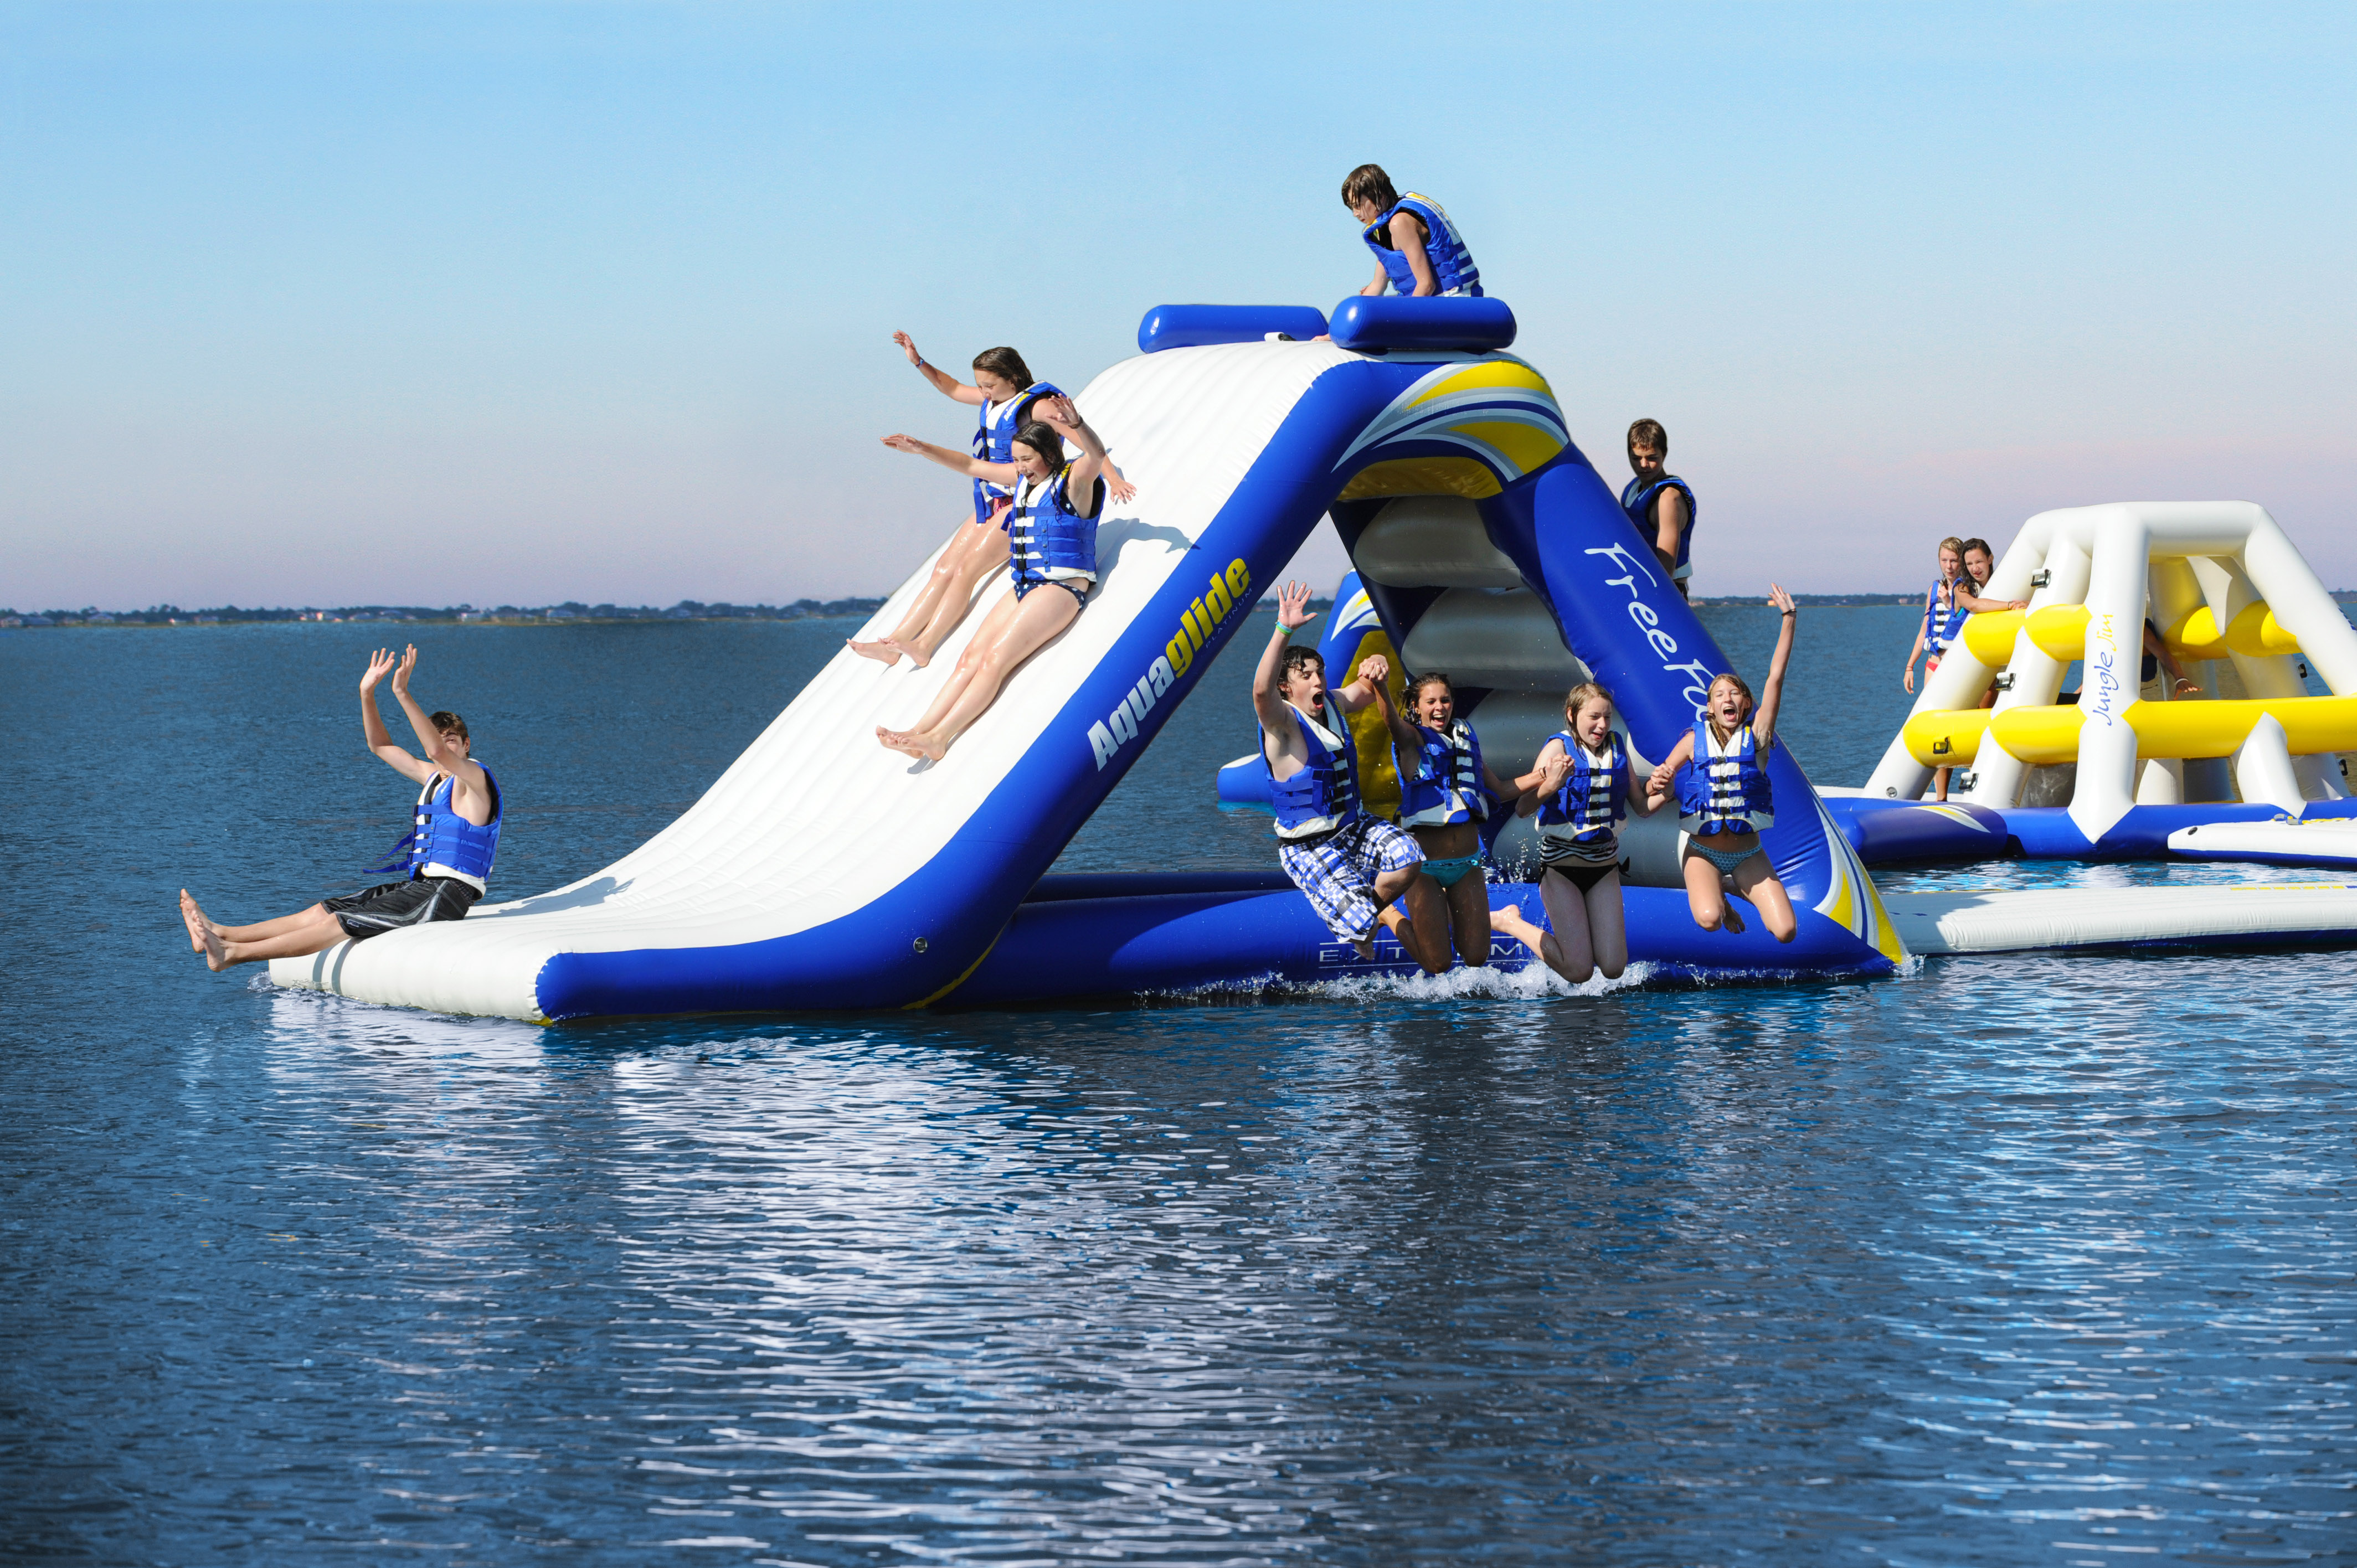 Kids slide down an inflatable slide in a lake while other kids jump into the lake off the side